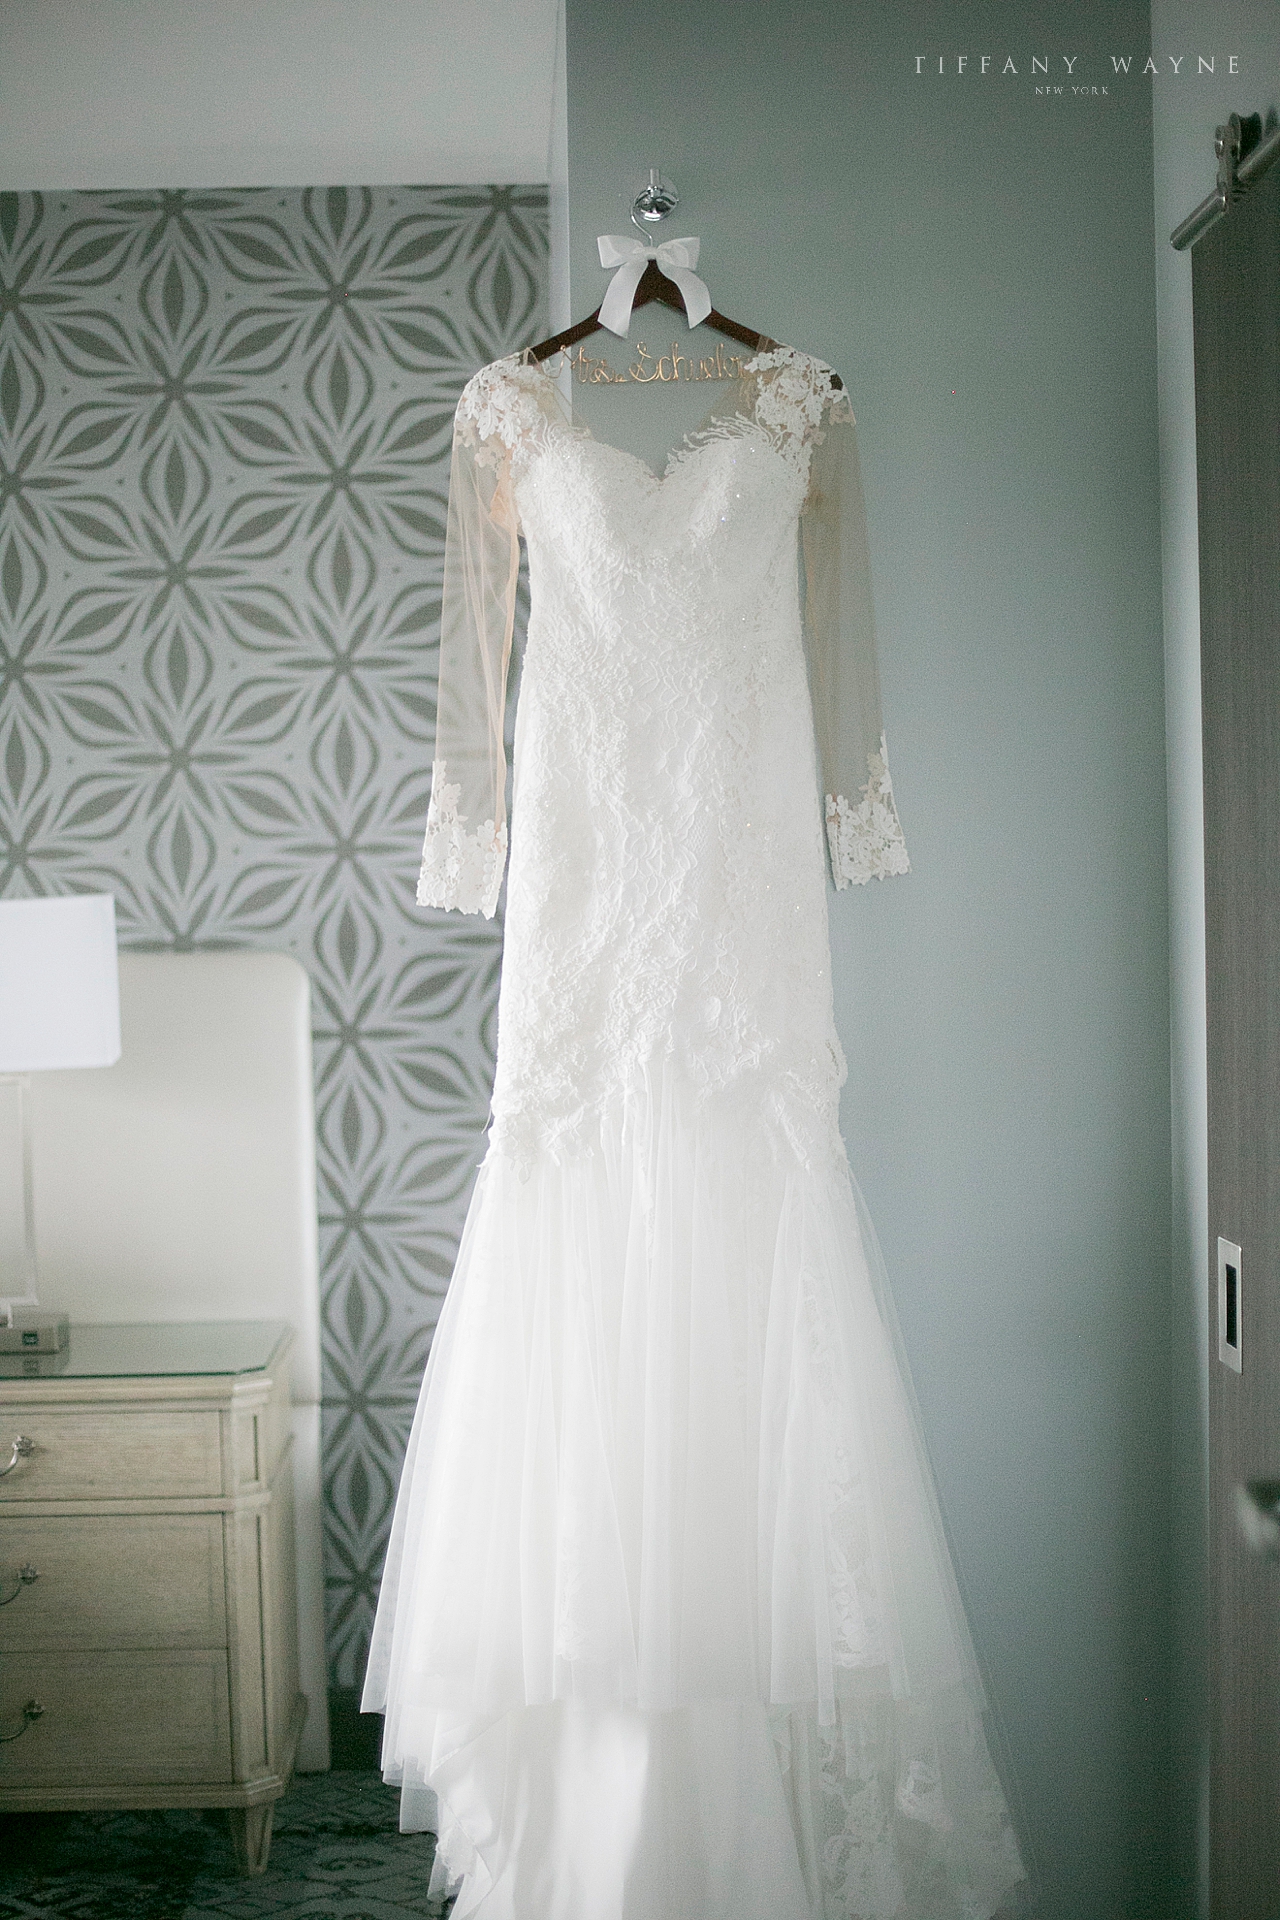 Angela's Bridal wedding gown photographed by new York wedding photographer Tiffany Wayne Photography